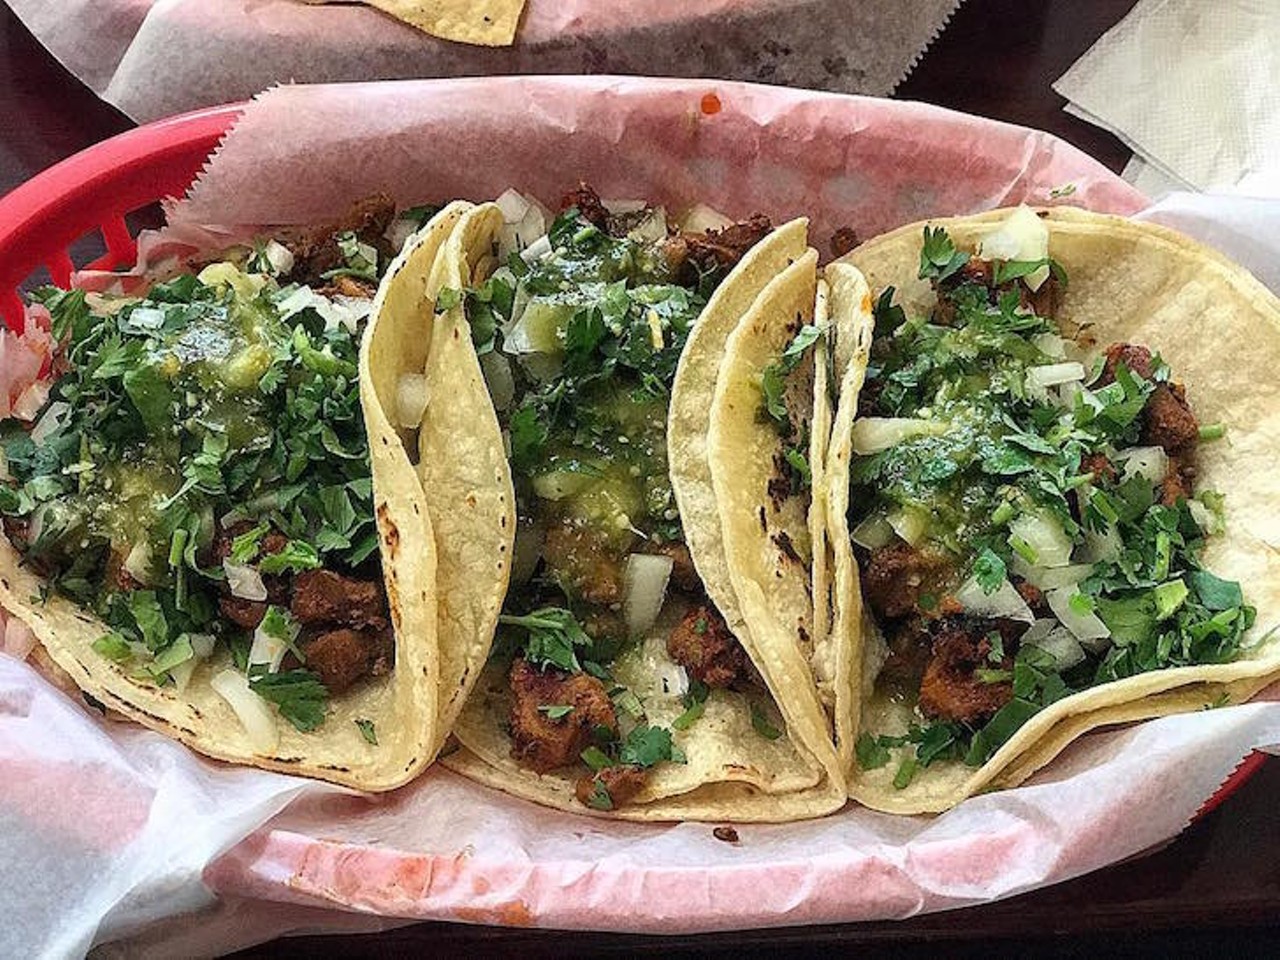 Tacos El Rancho
Multiple locations
Say yes to lengua tacos: buttery-soft cubes of beef tongue with onions, cilantro, tomatoes, cheese and sour cream layered atop two soft tortillas.
Photo via gottadocument/Instagram